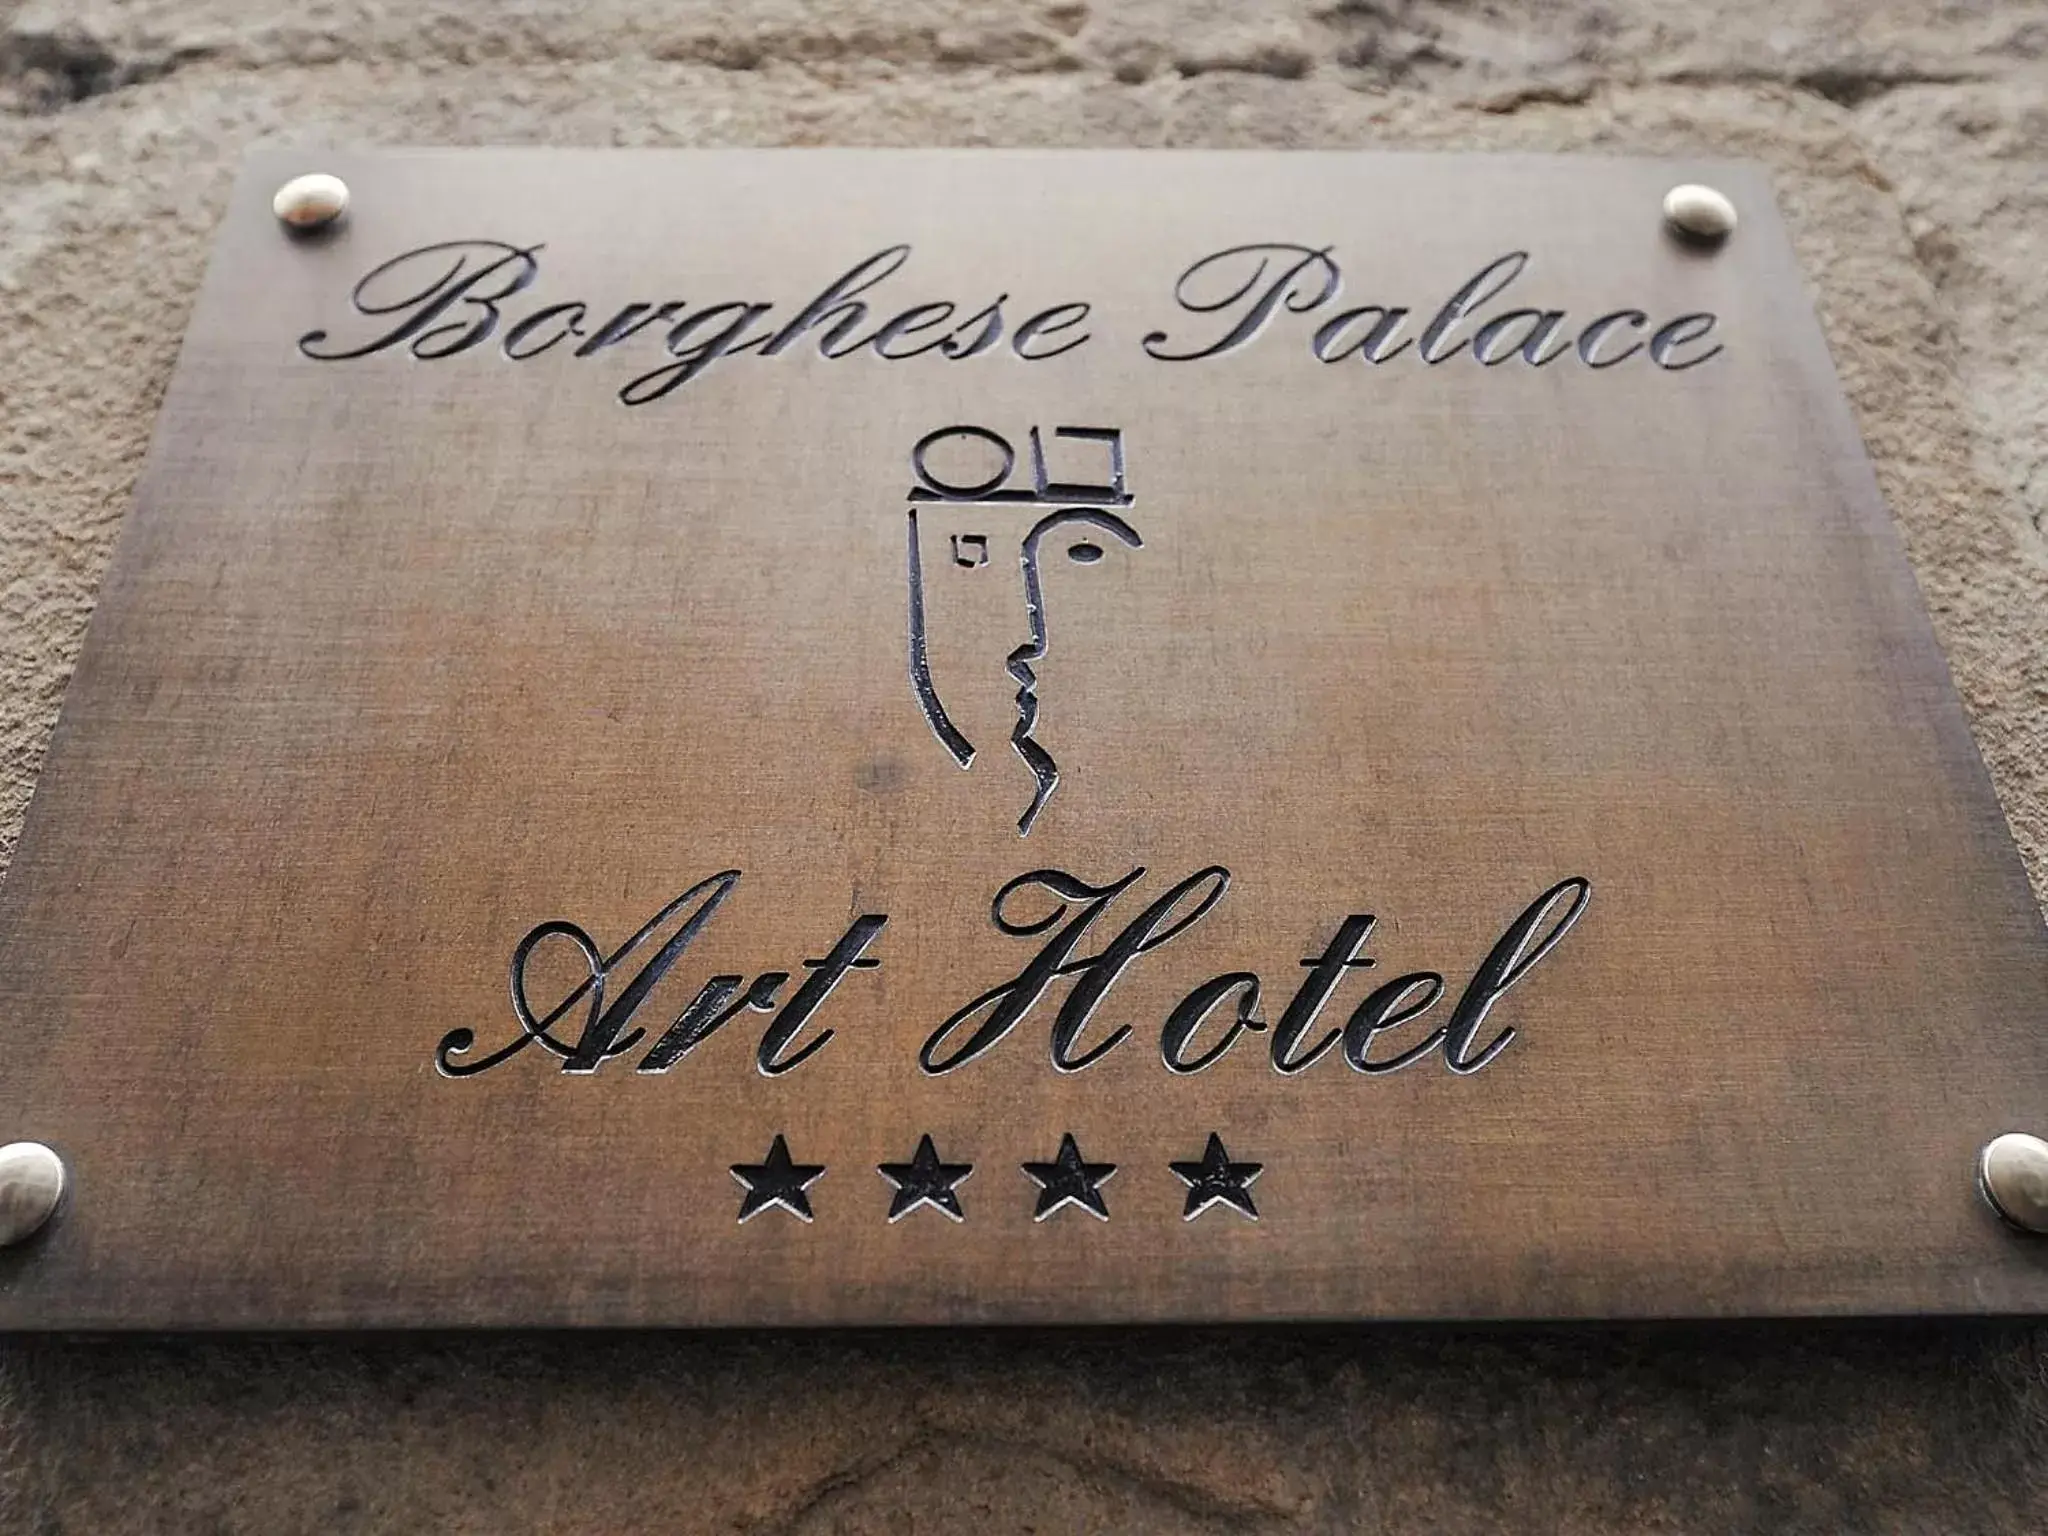 Property logo or sign, Property Logo/Sign in Borghese Palace Art Hotel